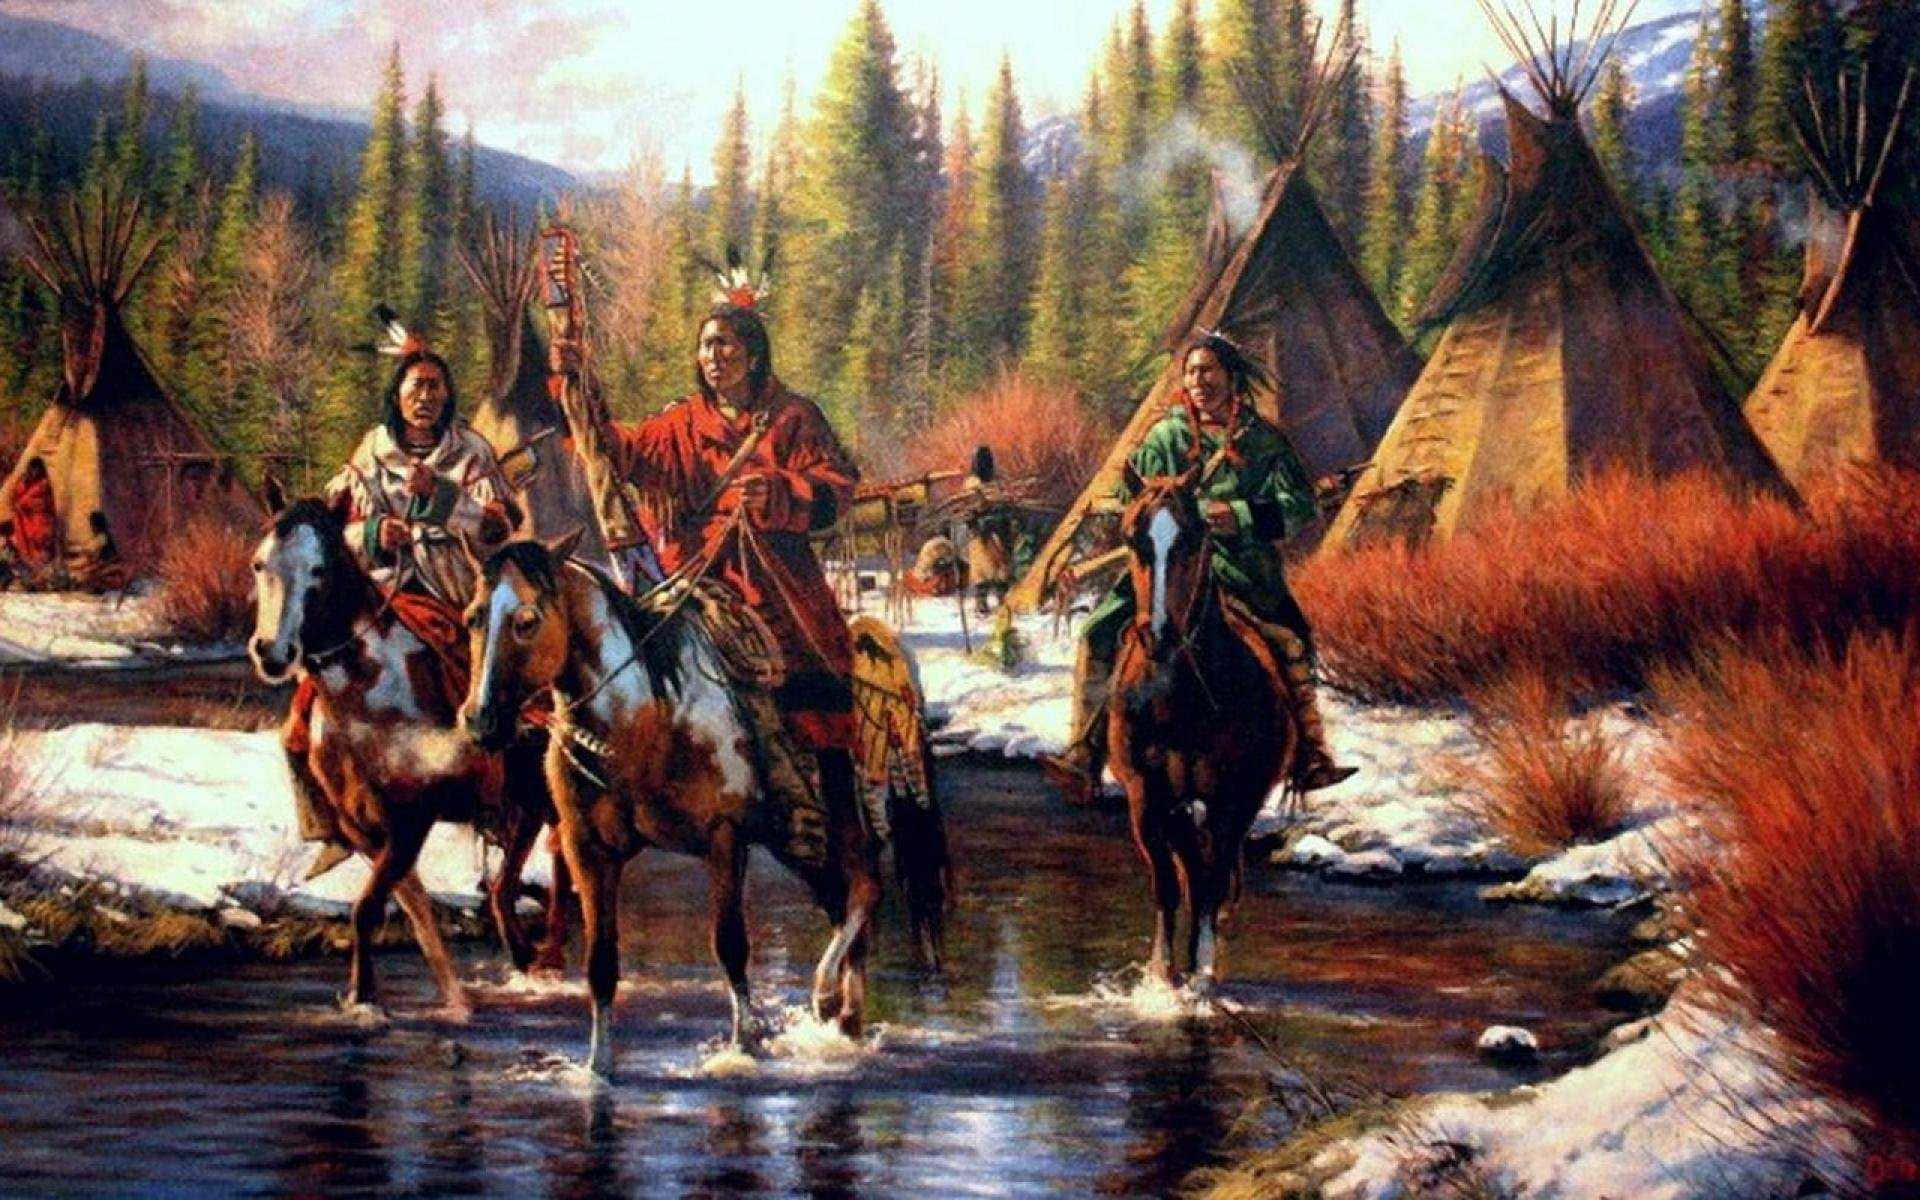 A Painting Of Native Americans On Horses In The Snow